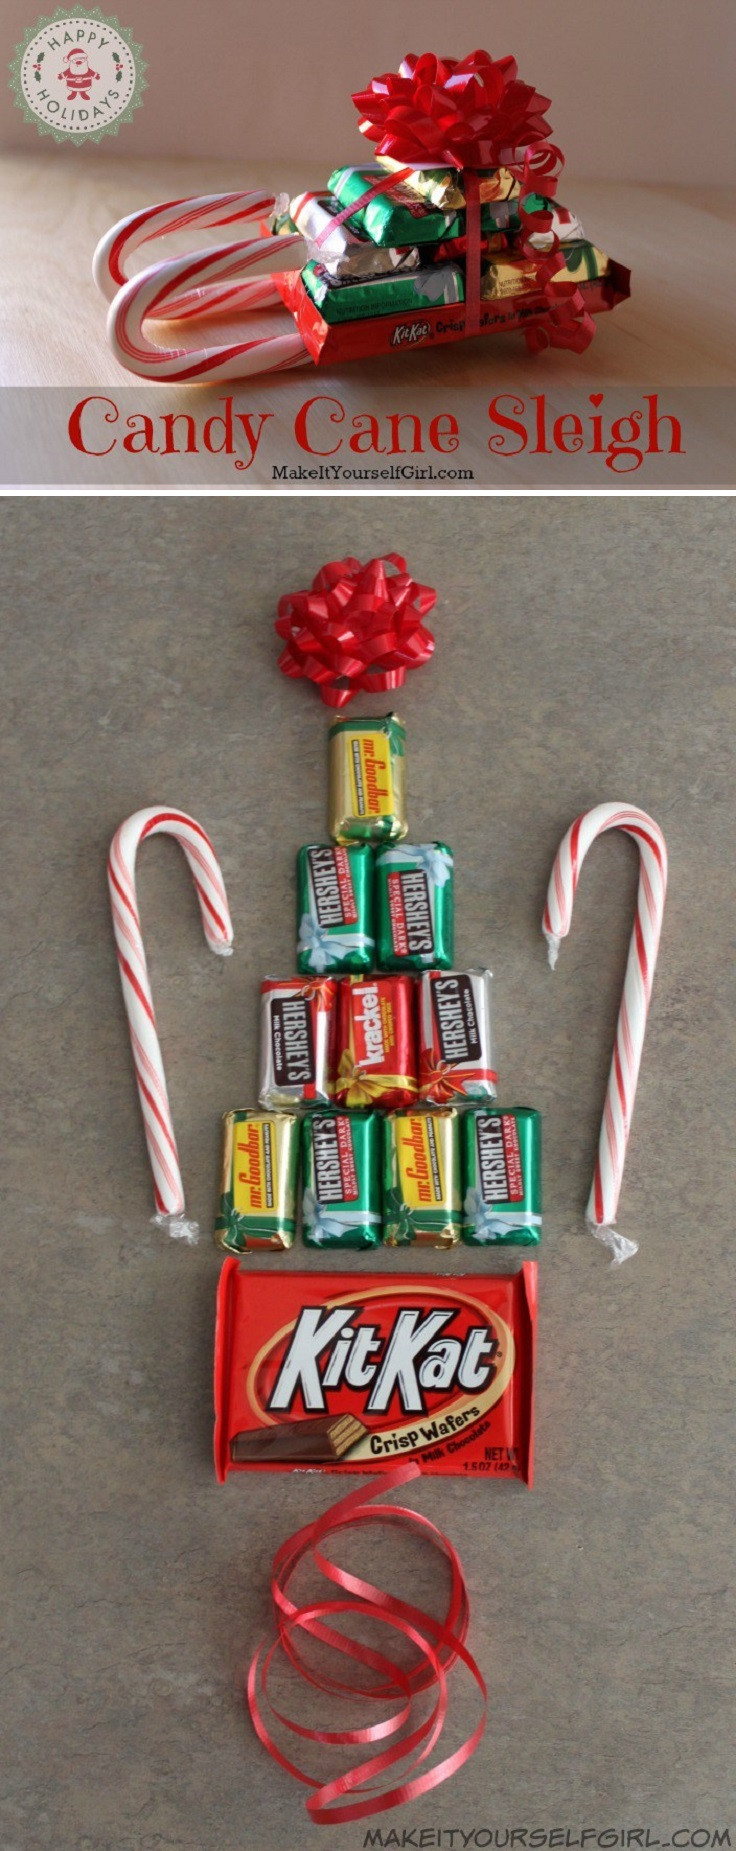 Christmas Candy Ideas
 12 Wondrous DIY Candy Cane Sleigh Ideas That Will Leave